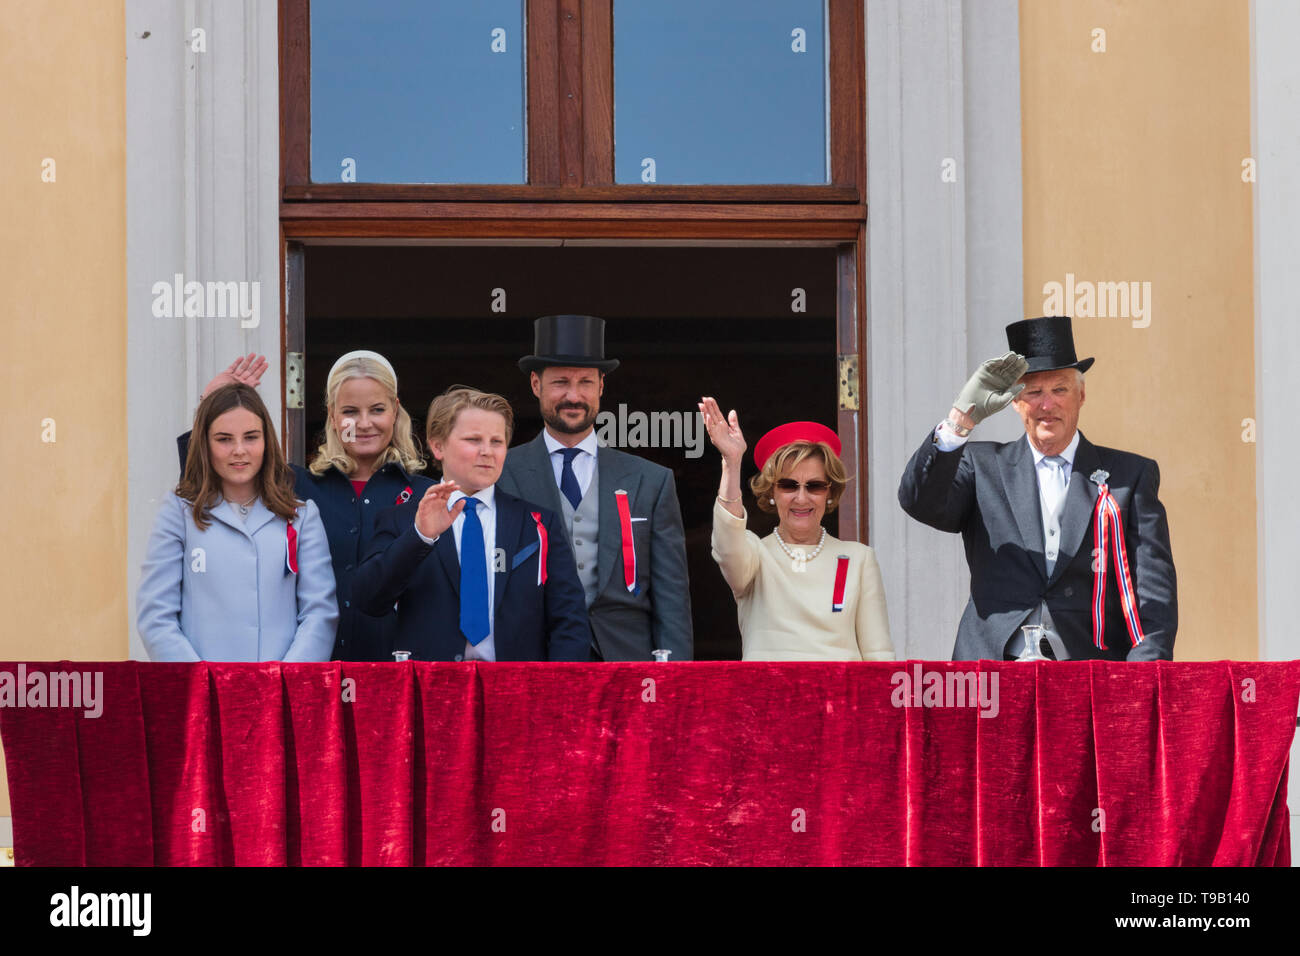 Norway, Oslo - May 17, 2019. The people is greeted by the royal family who are waving to the crowds from the Royal Palace balcony during the Norwegian Constitution Day, also referred to as Sytttende Mai, in central Oslo. (L-R) Princess Ingrid Alexandra, Mette-Marit, Crown Princess of Norway, Prince Sverre Magnus of Norway, Haakon, Crown Prince of Norway, Queen Sonja of Norway and King Harald V. (Photo credit: Gonzales Photo - Stian S. Moller). Stock Photo